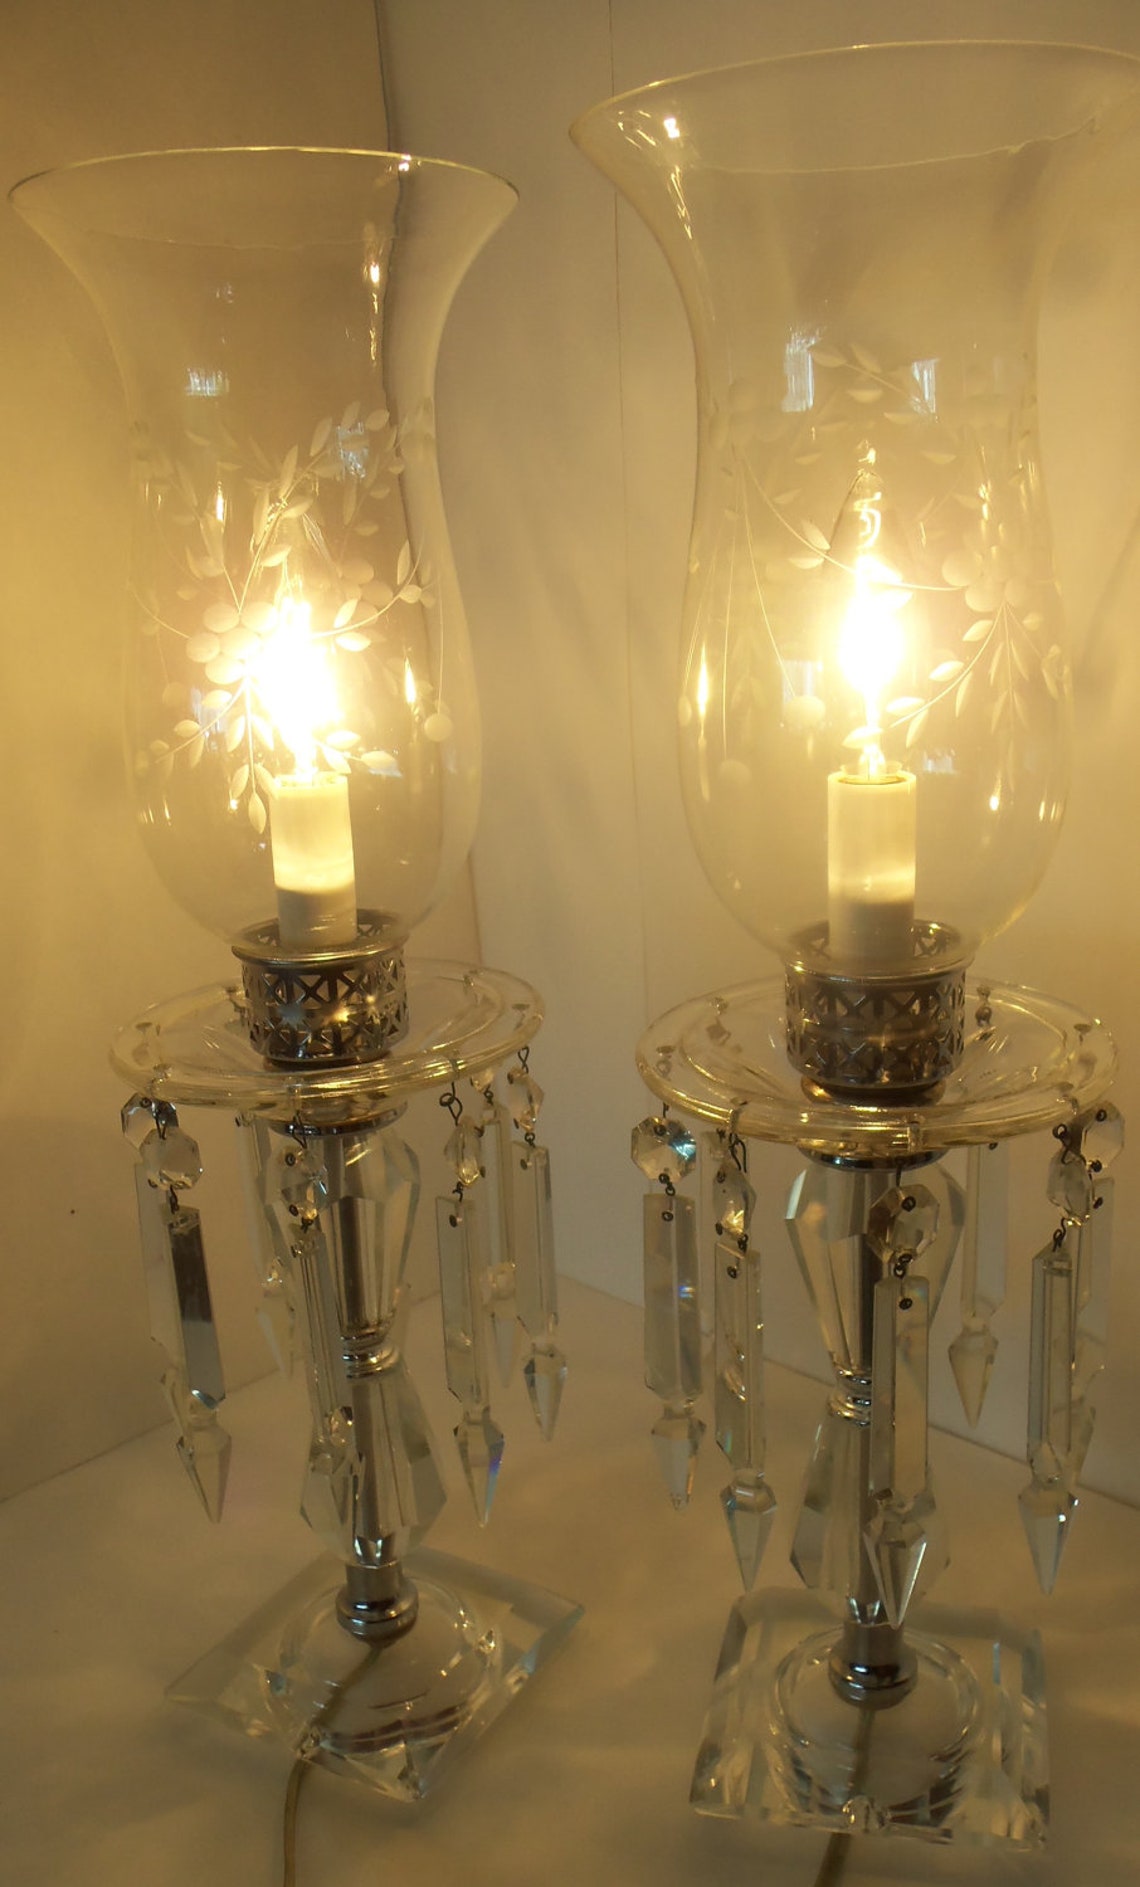 Beautiful Vintage Crystal Hurricane Lamps With Hanging Prisms Etsy